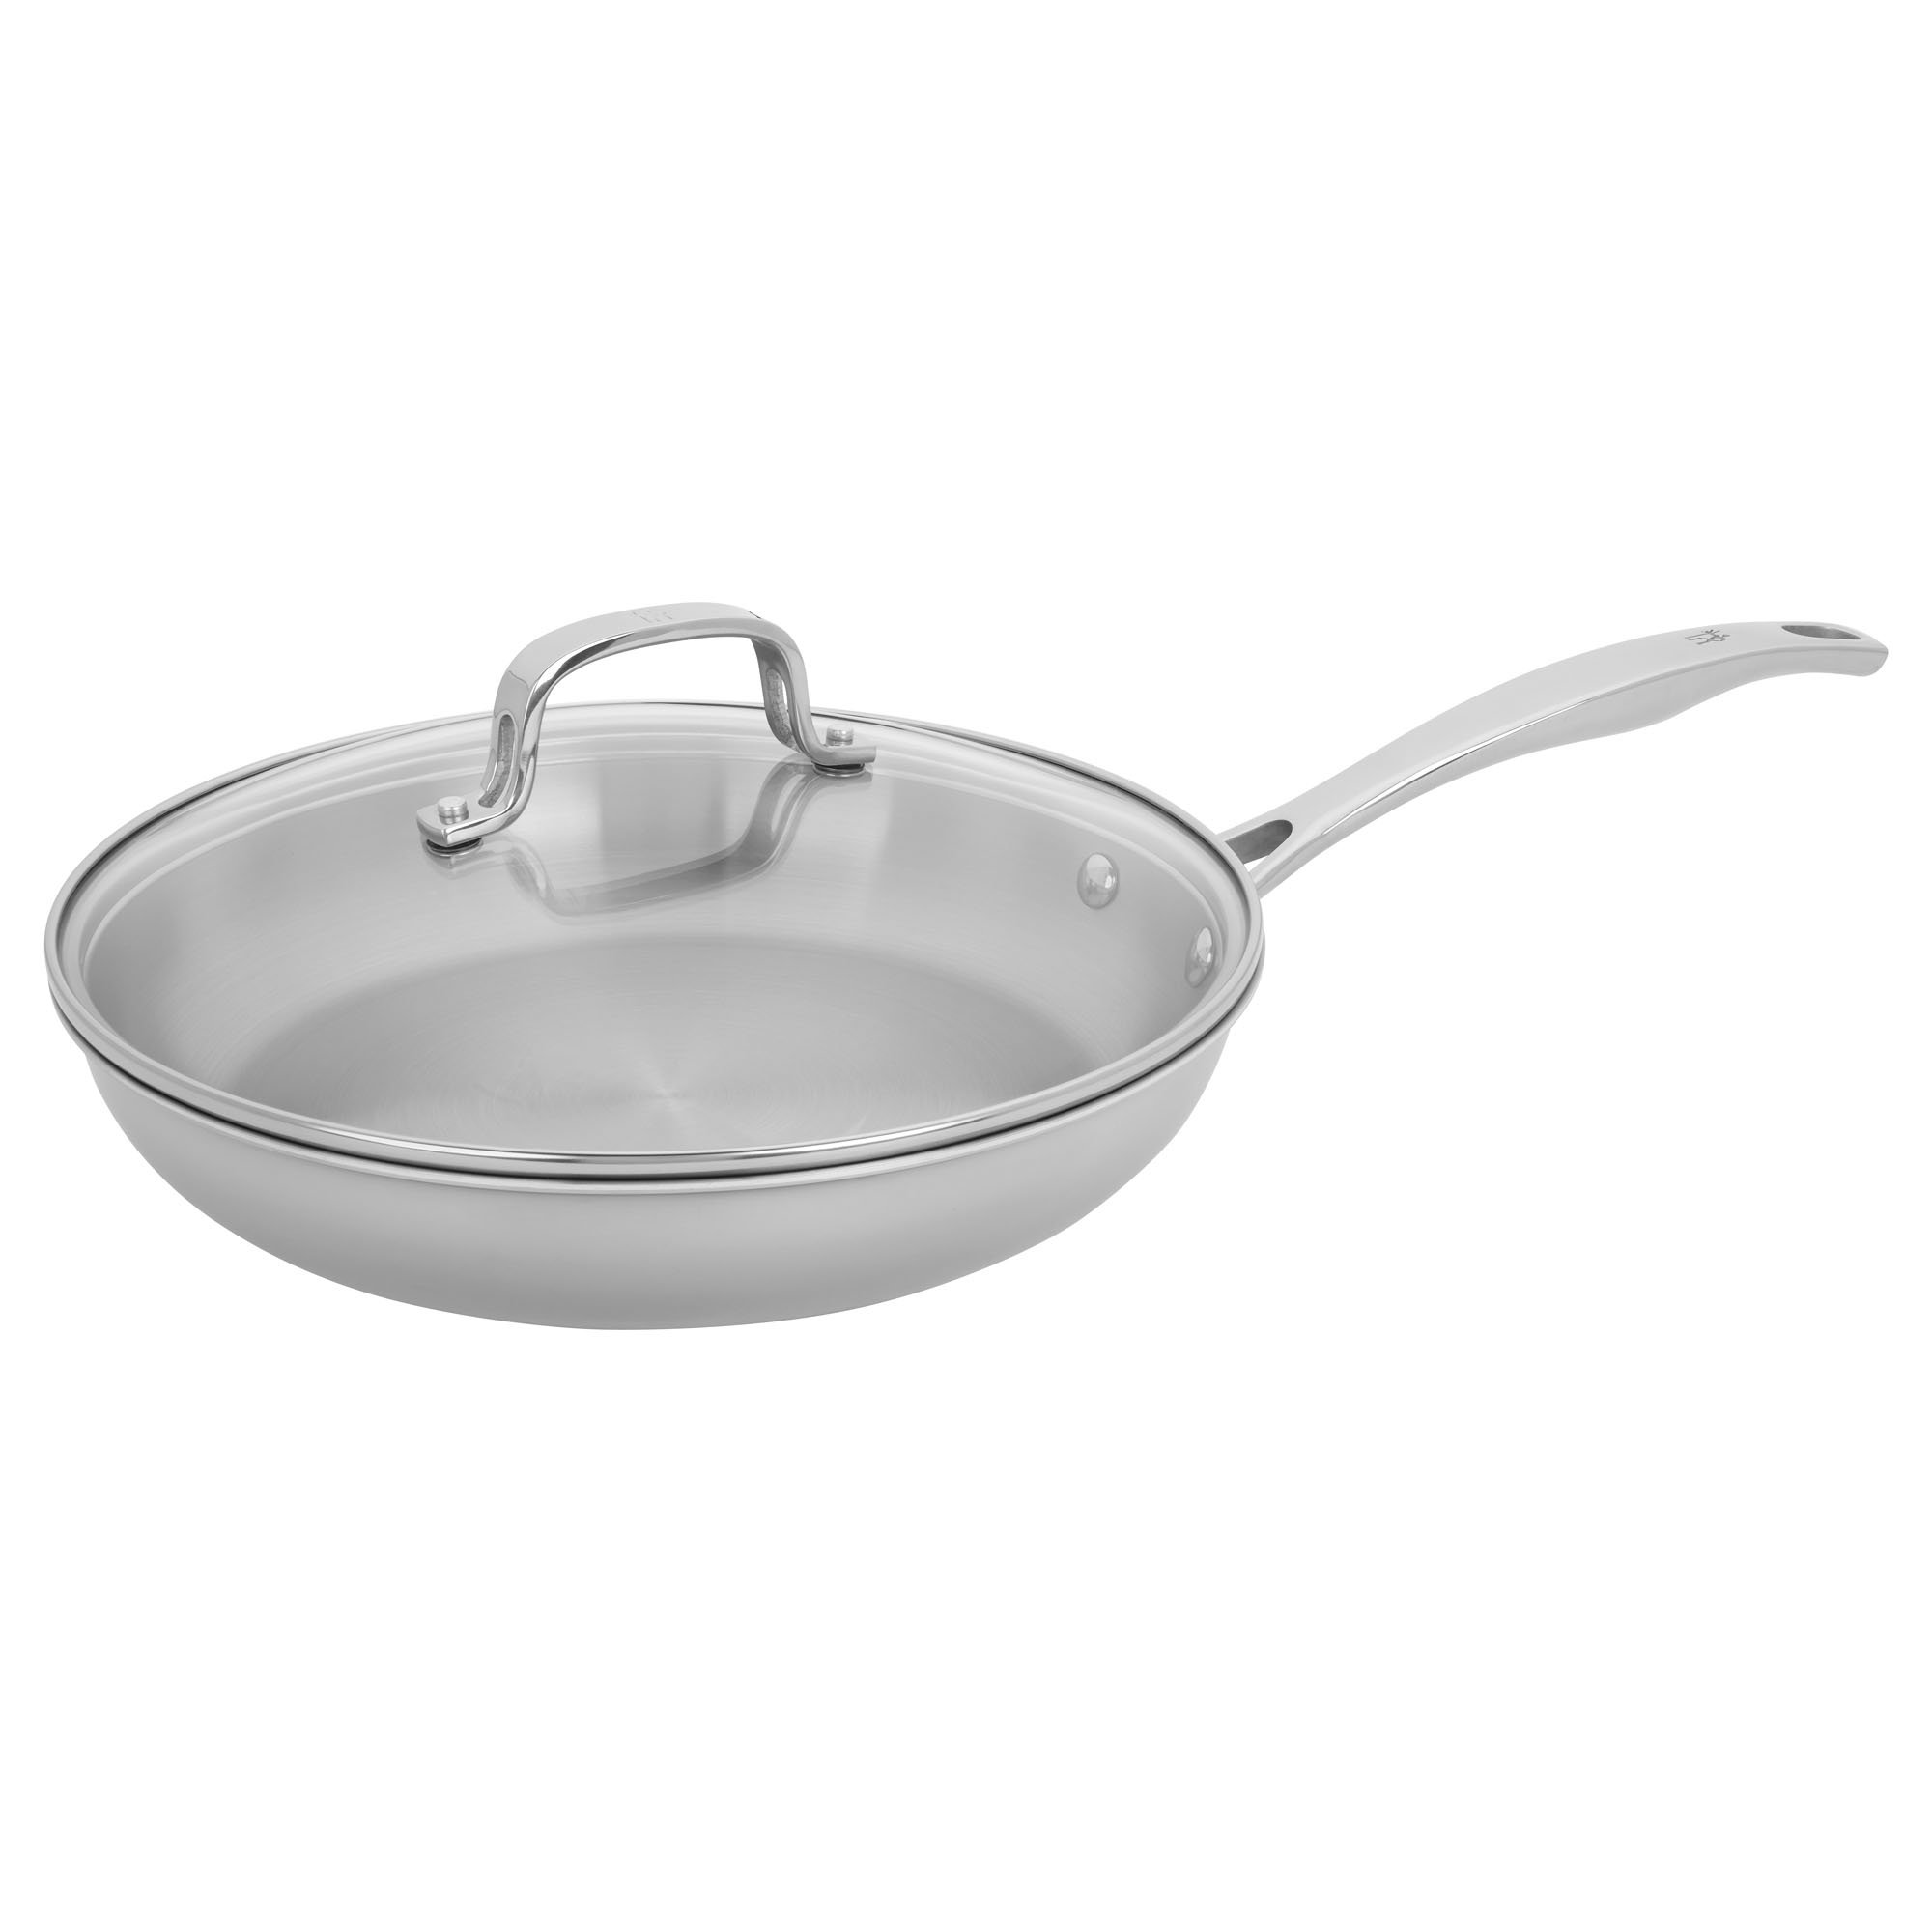 Henckels Clad H3 10-pc, stainless steel pots and pans set